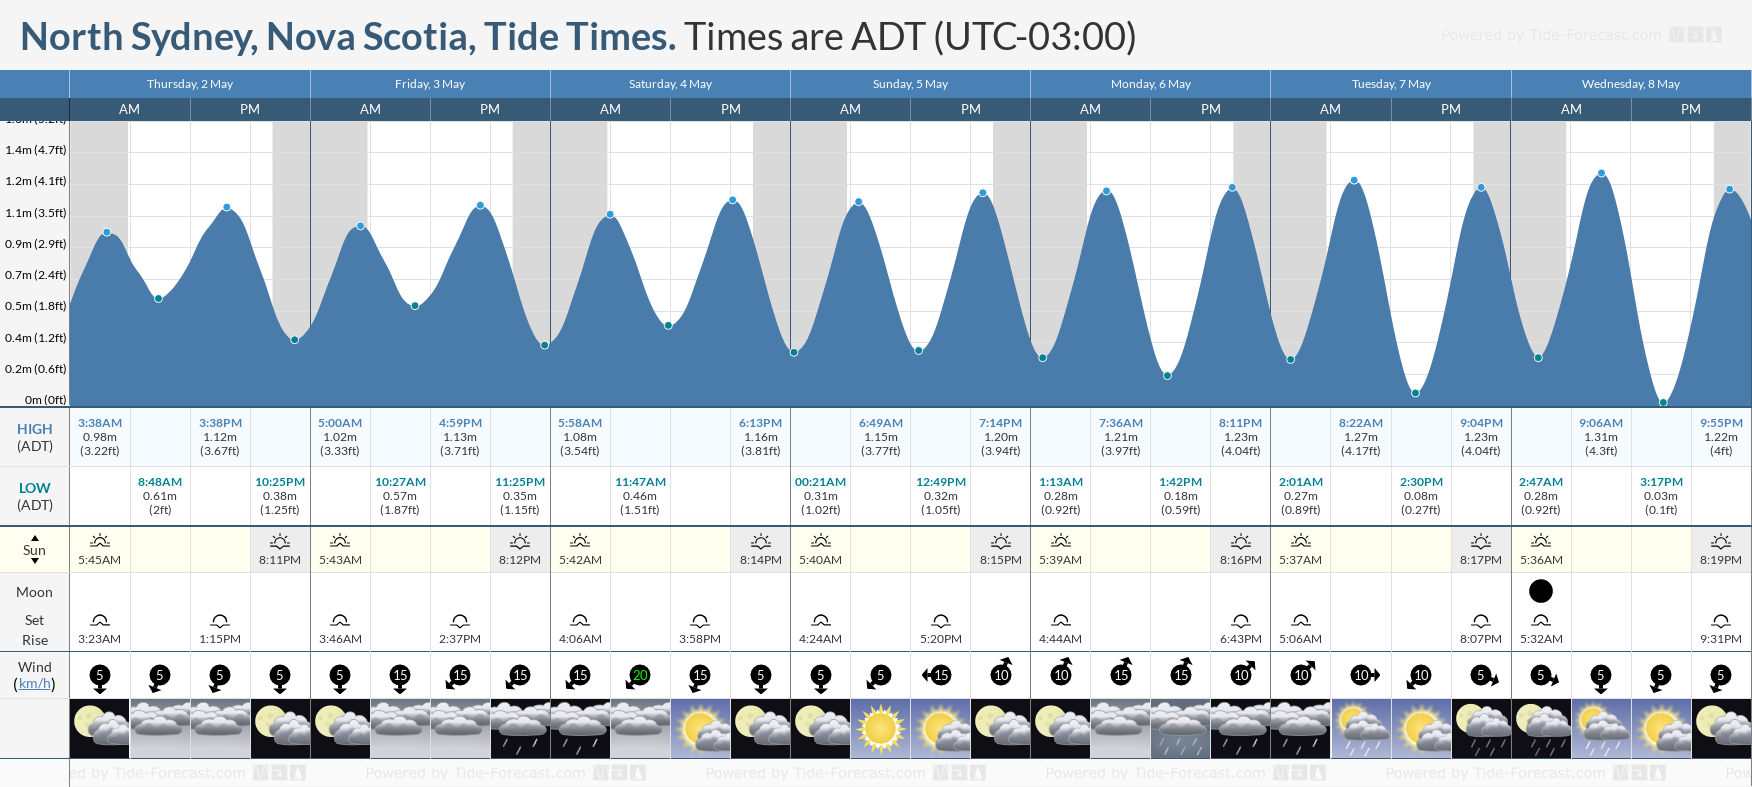 North Sydney, Nova Scotia Tide Chart including high and low tide tide times for the next 7 days